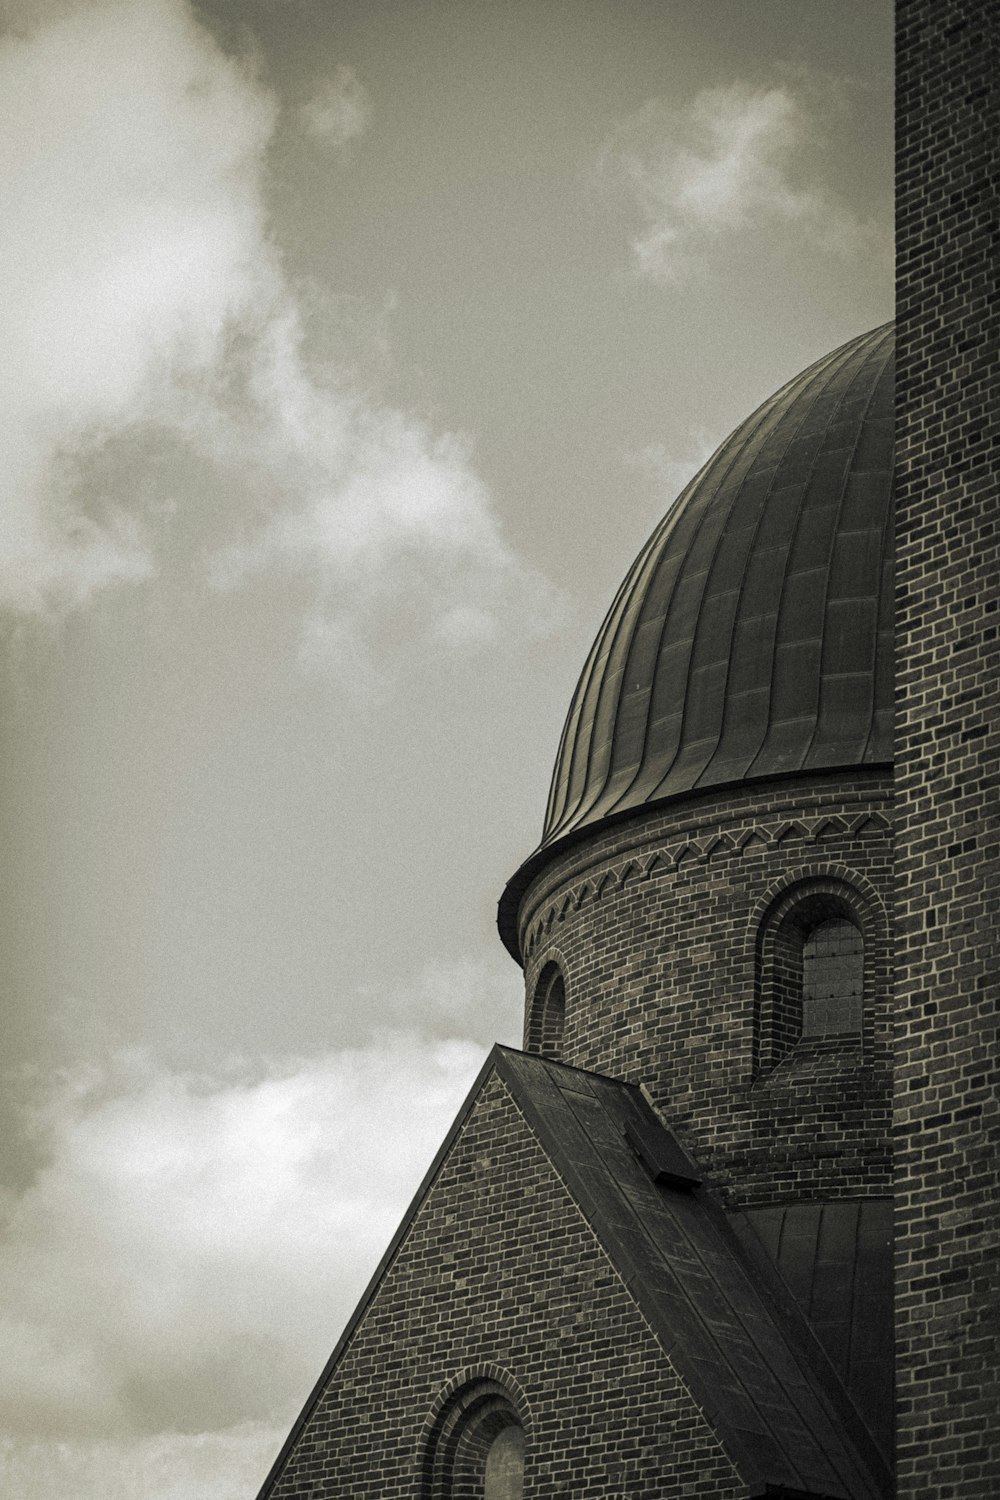 a black and white photo of a church steeple